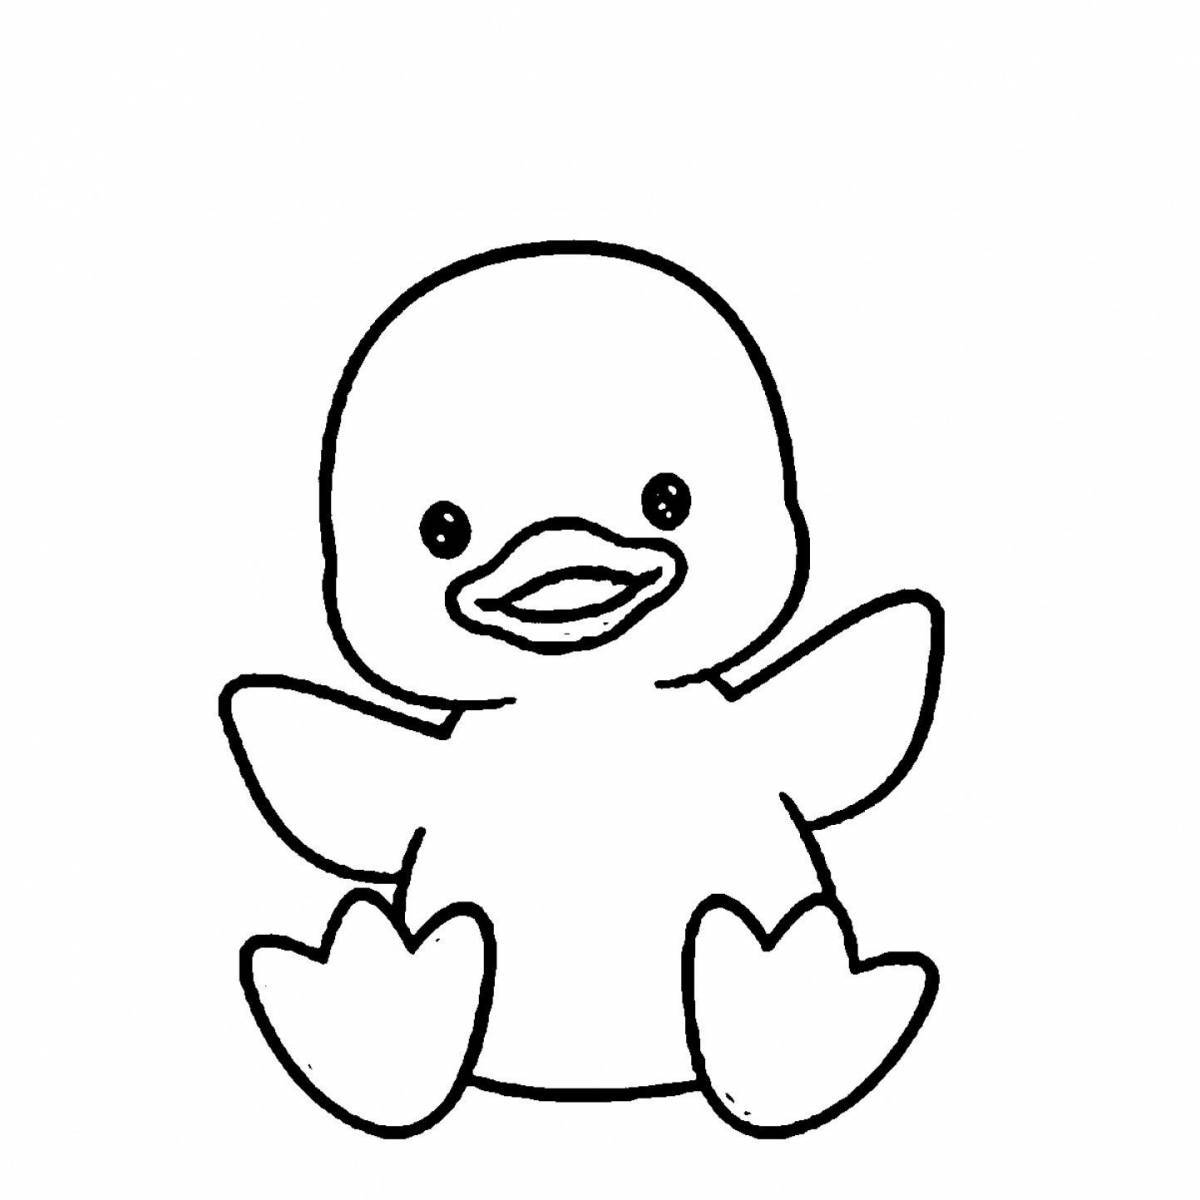 Cute duck lalaphan coloring pages for kids